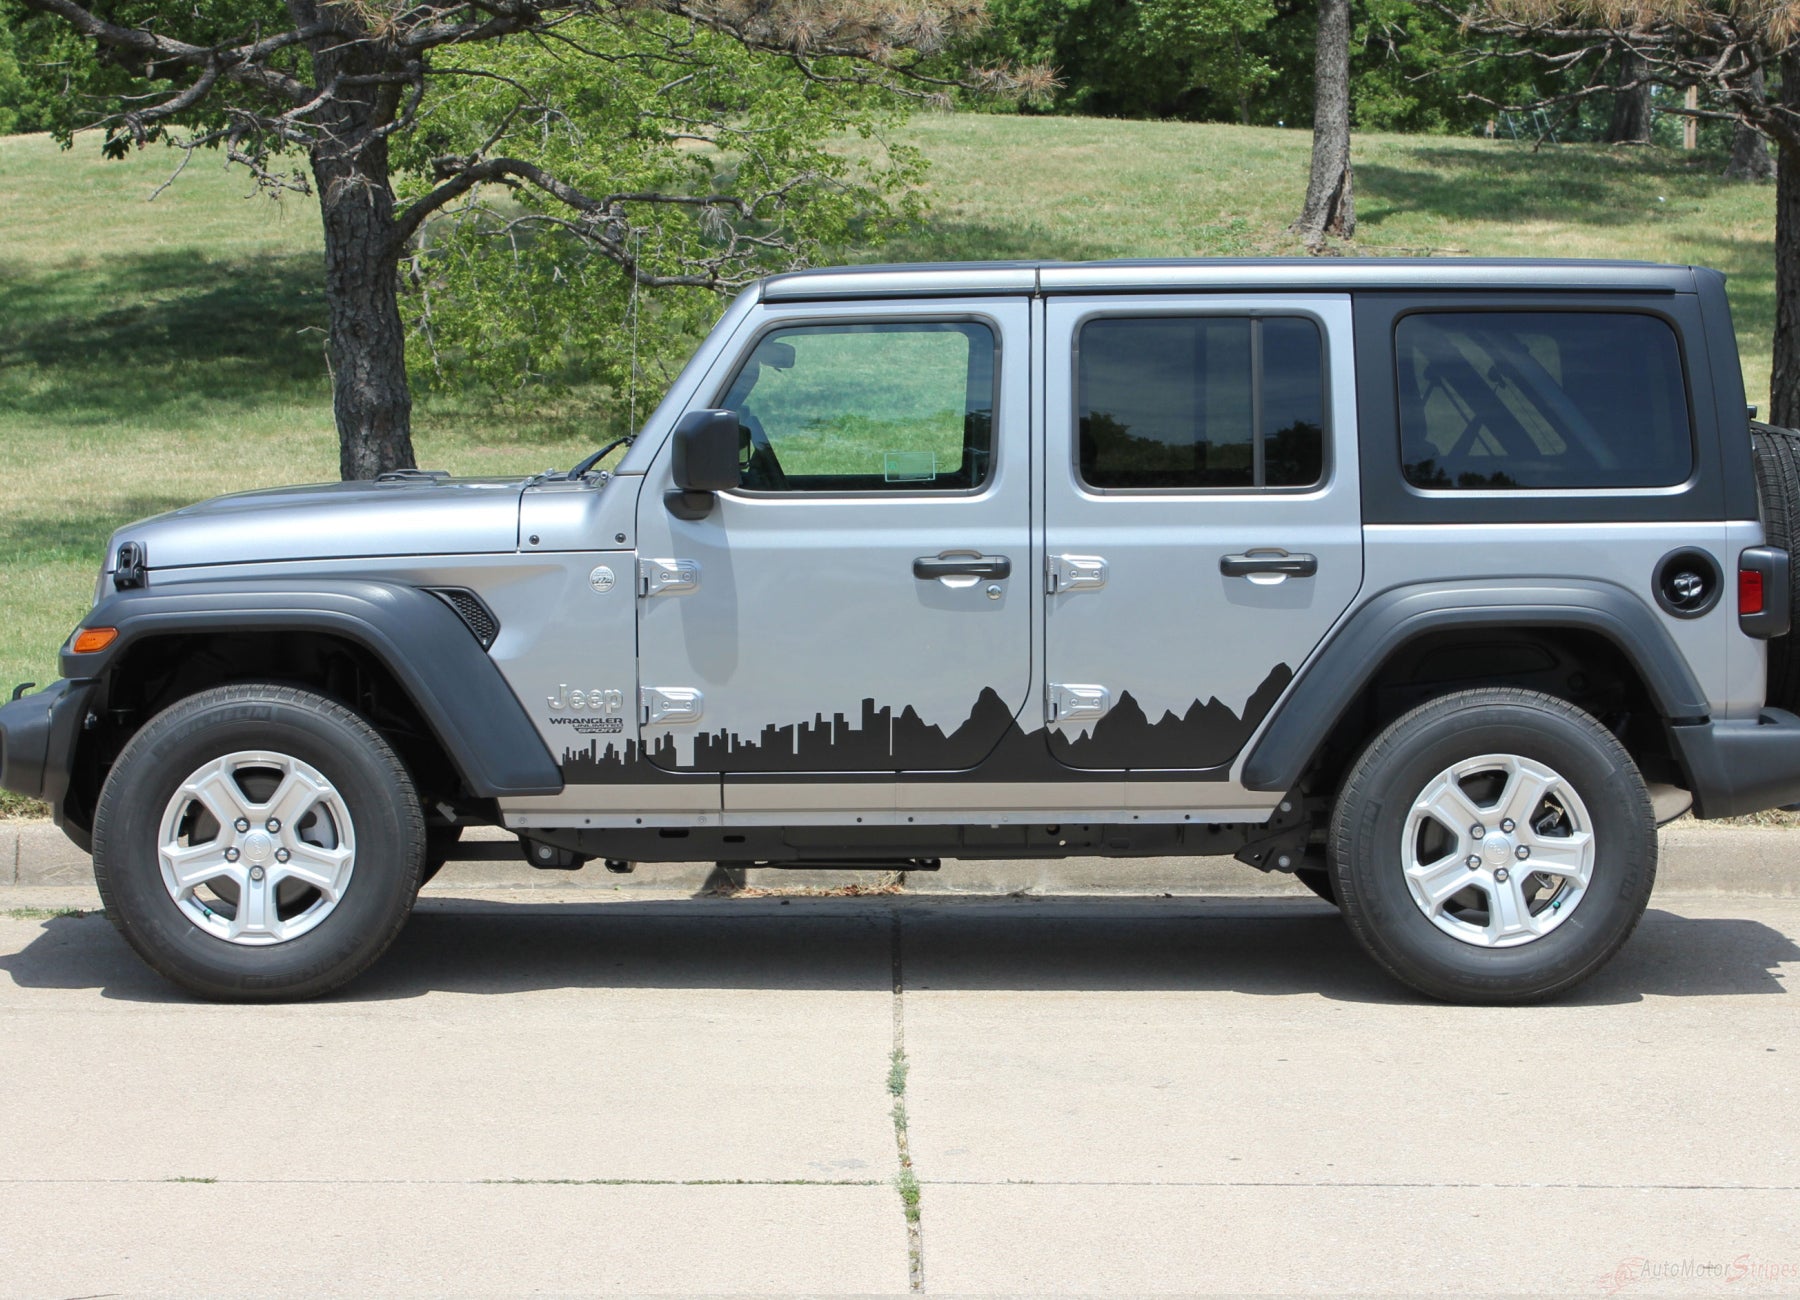 Jeep Wrangler JL Scape Body Decals | Vinyl Graphics | Jeep Stripes | Auto  Motor Stripes Decals Vinyl Graphics and 3M Striping Kits